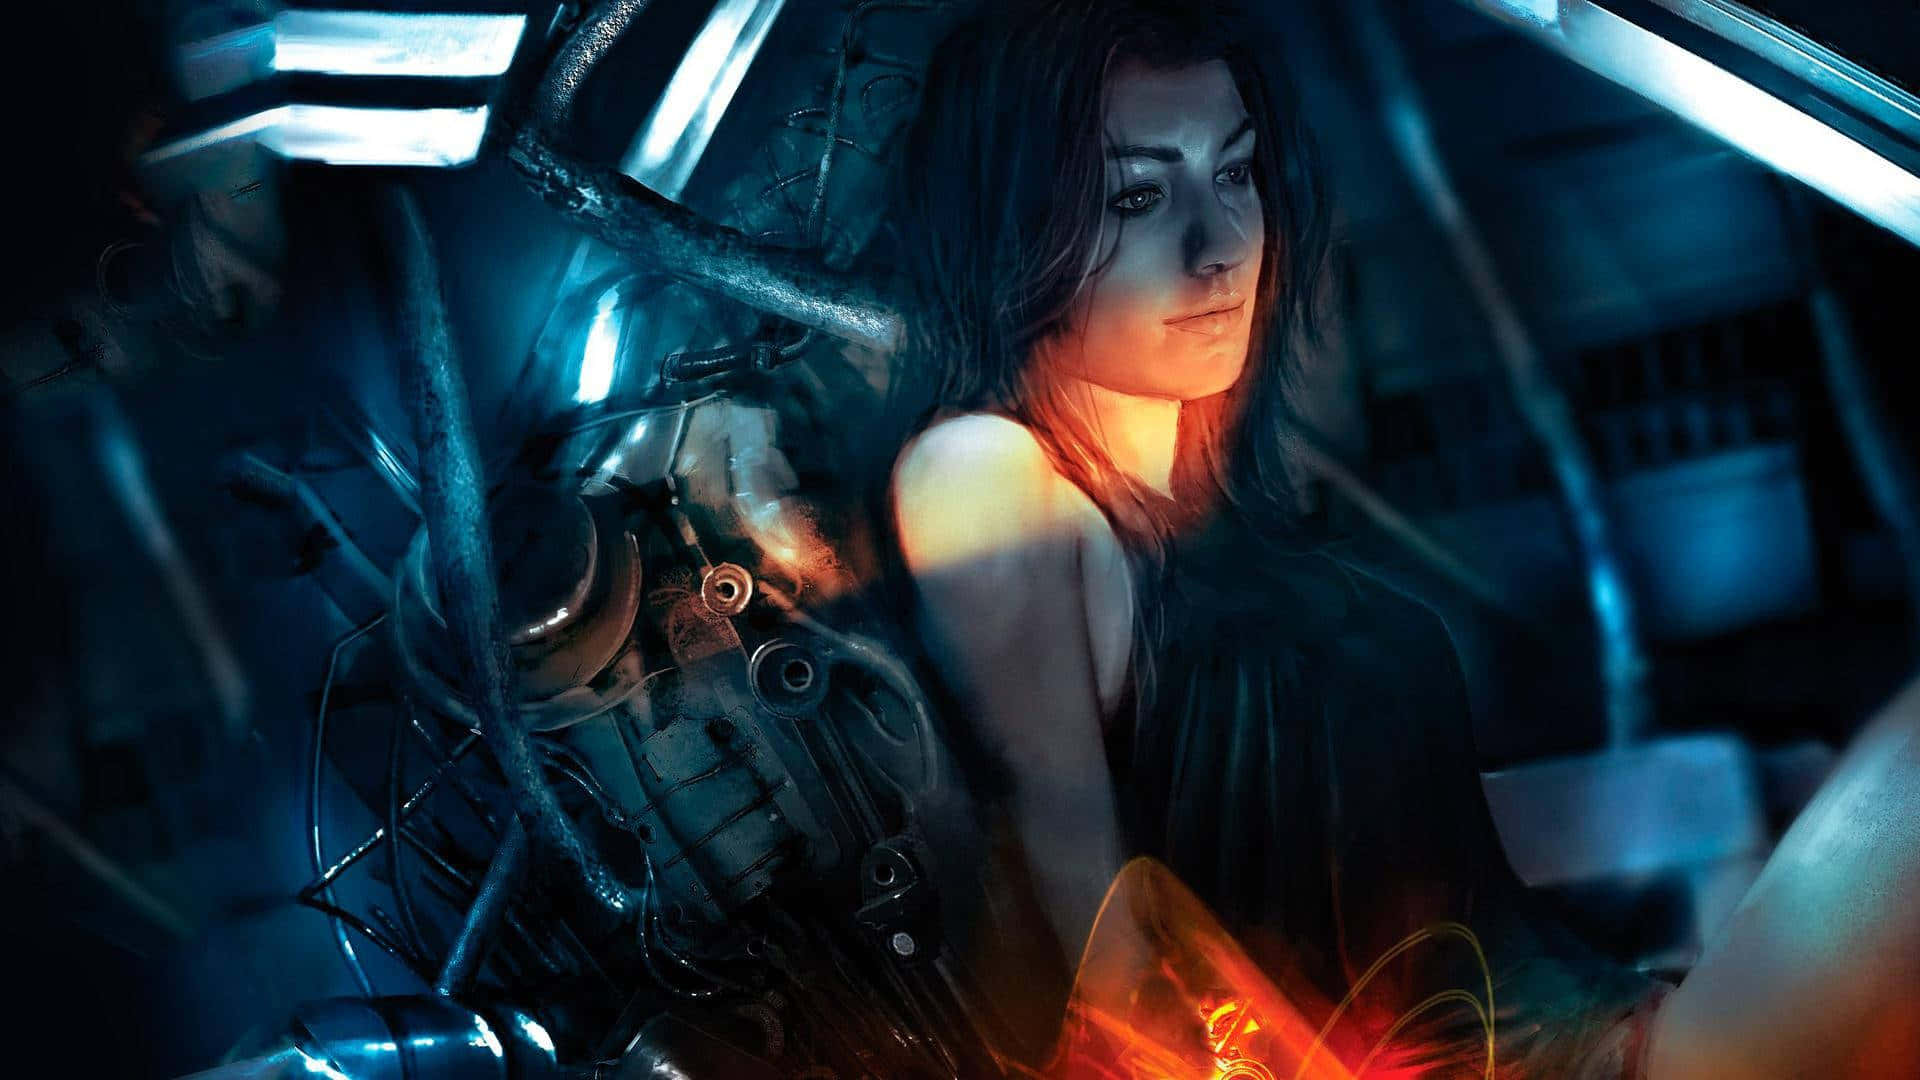 Commander Femshep in action during a Mass Effect mission Wallpaper